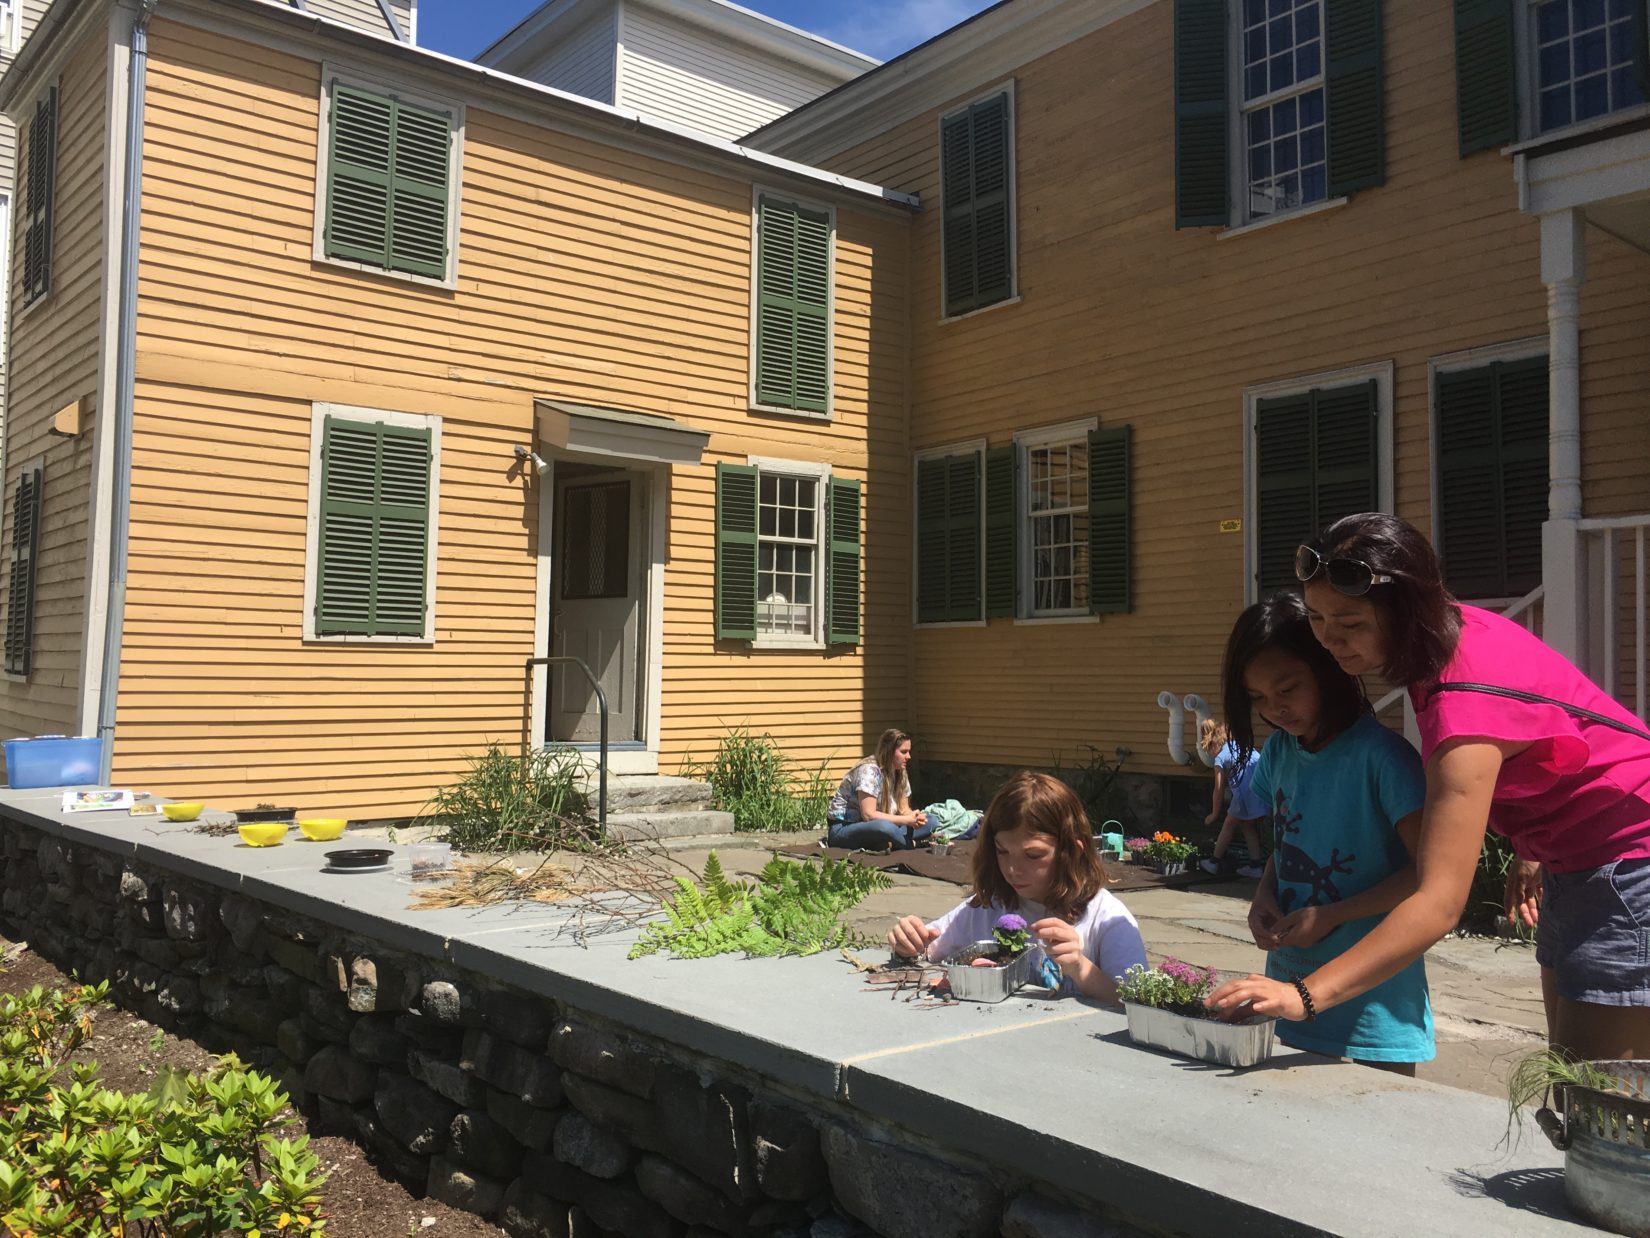 families use leaves, flowers and natural items to make fairy gardens on the patio behind the spalding house, mustard yellow house with dark green shutters